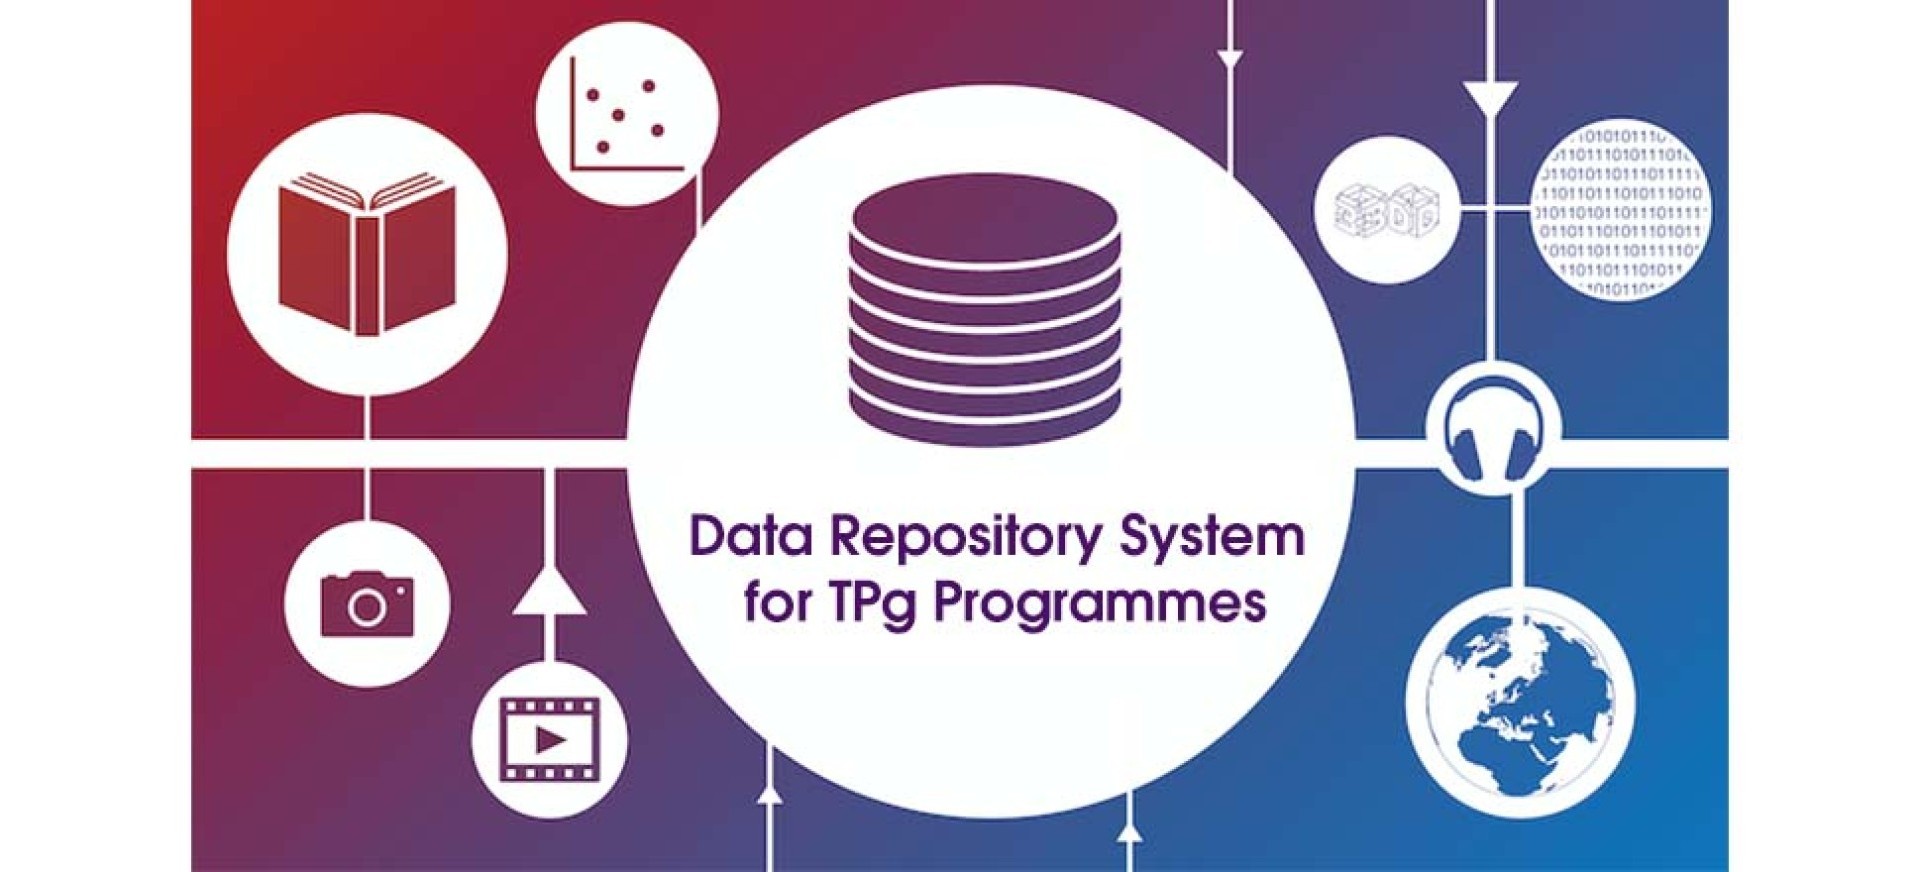 Data Repository System for TPg Programmes